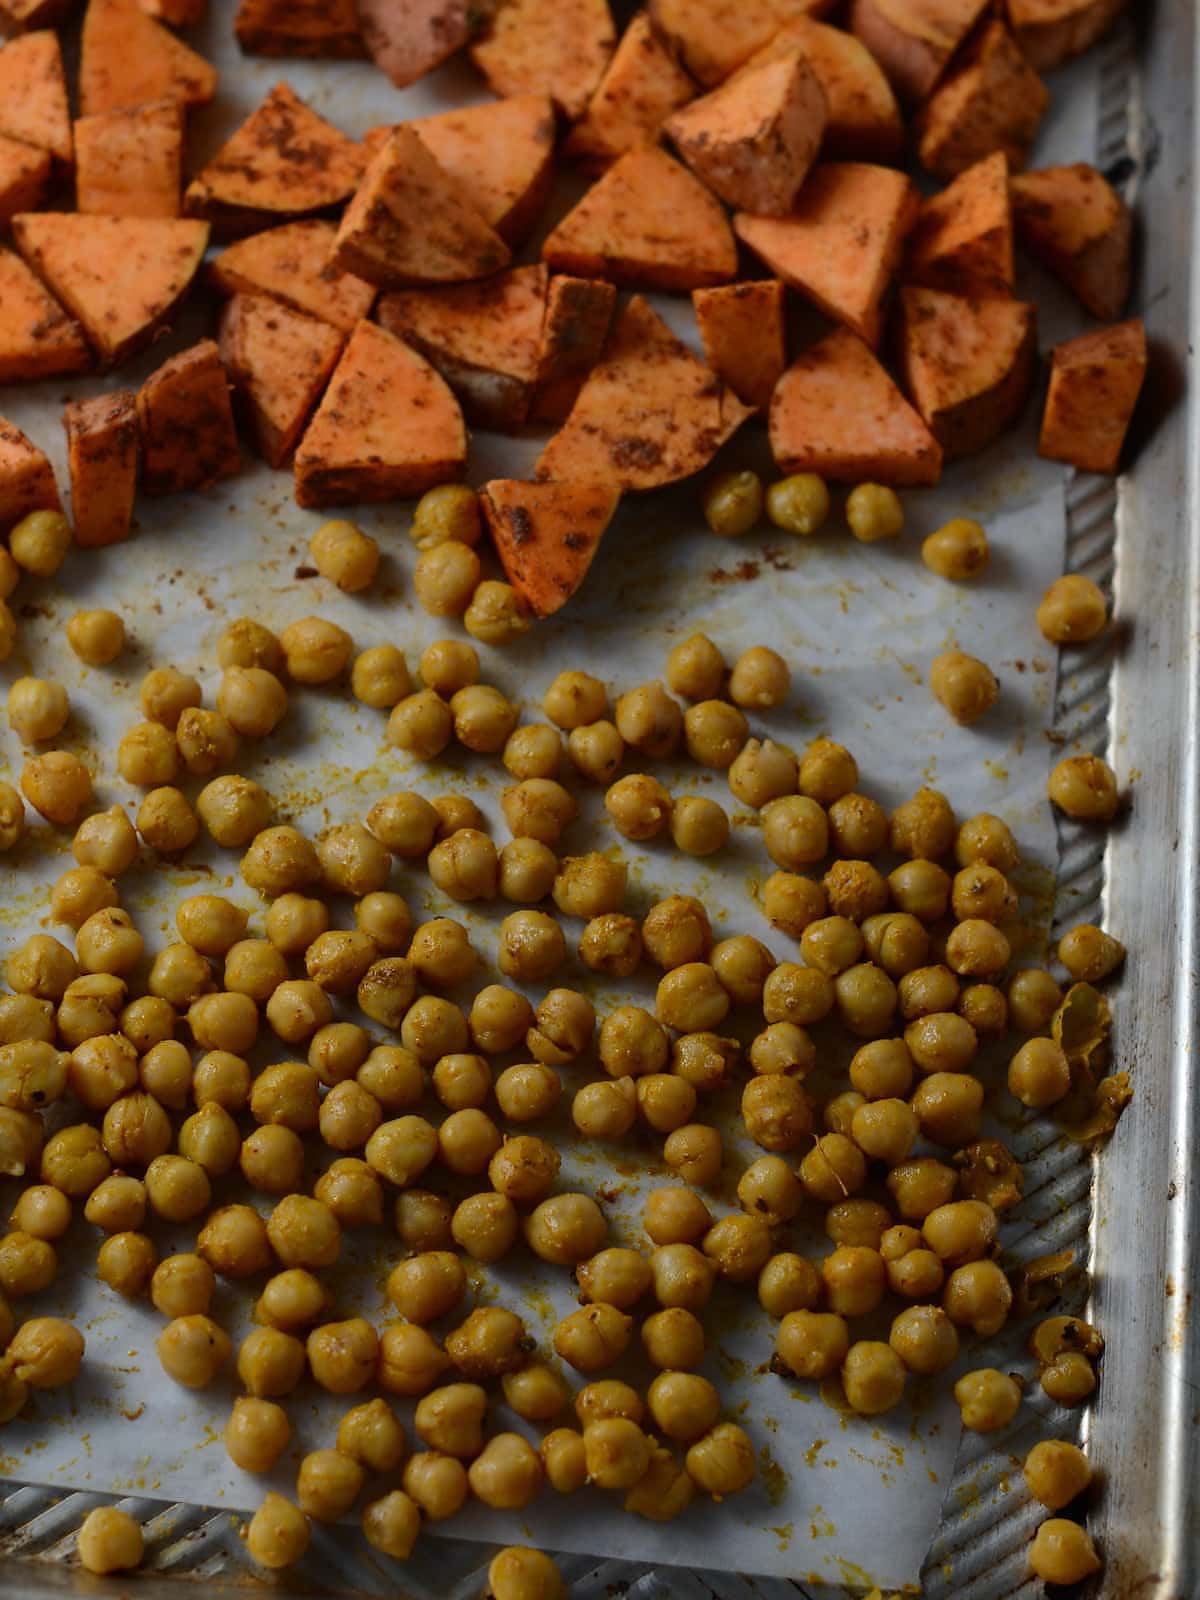 This is a photo of pre-cooked sweet potatoes and chickpeas on a pan.